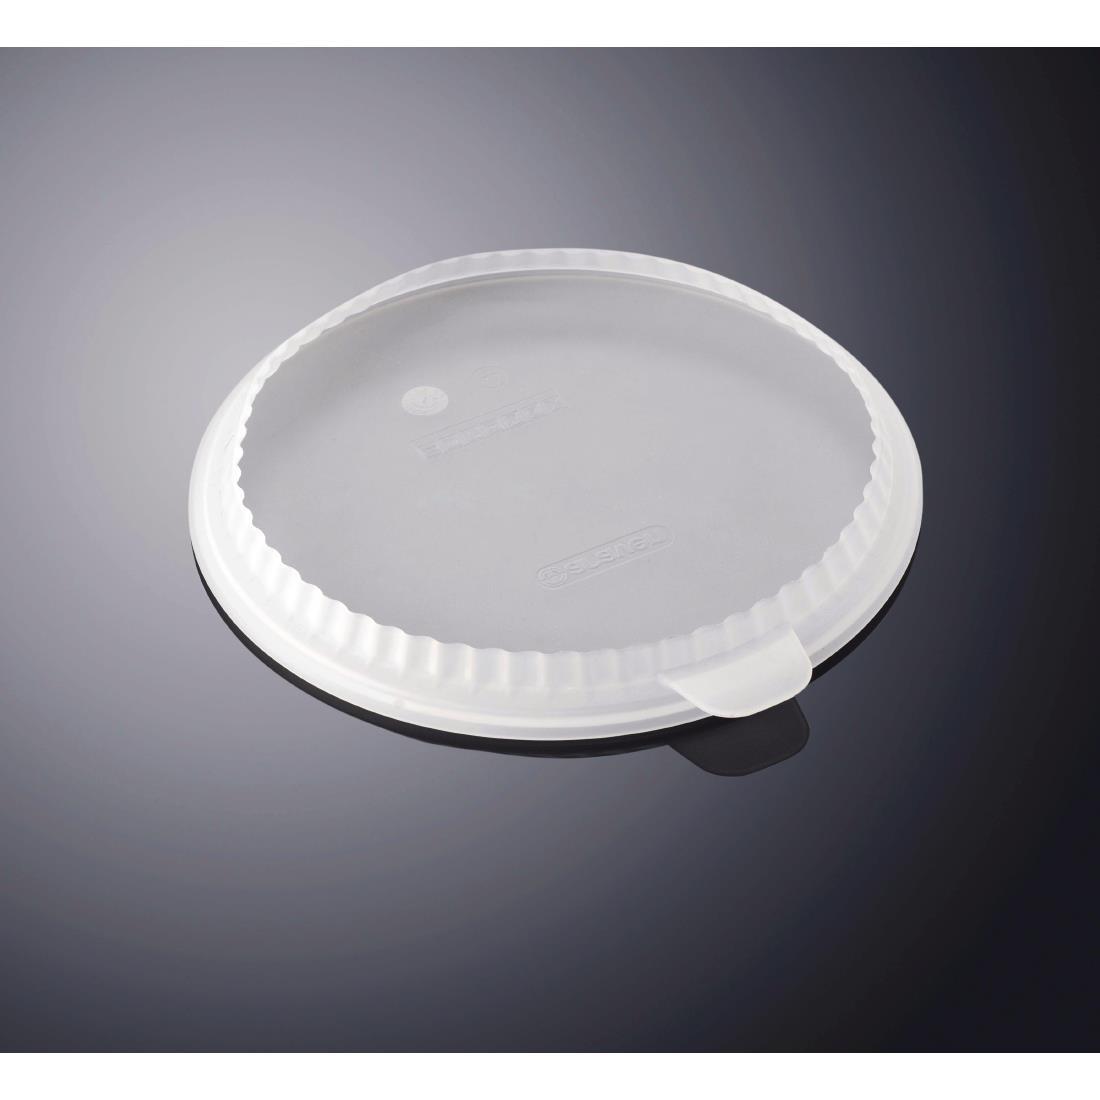 Araven Round Silicone Lid Clear 325mm - FP933  - 2